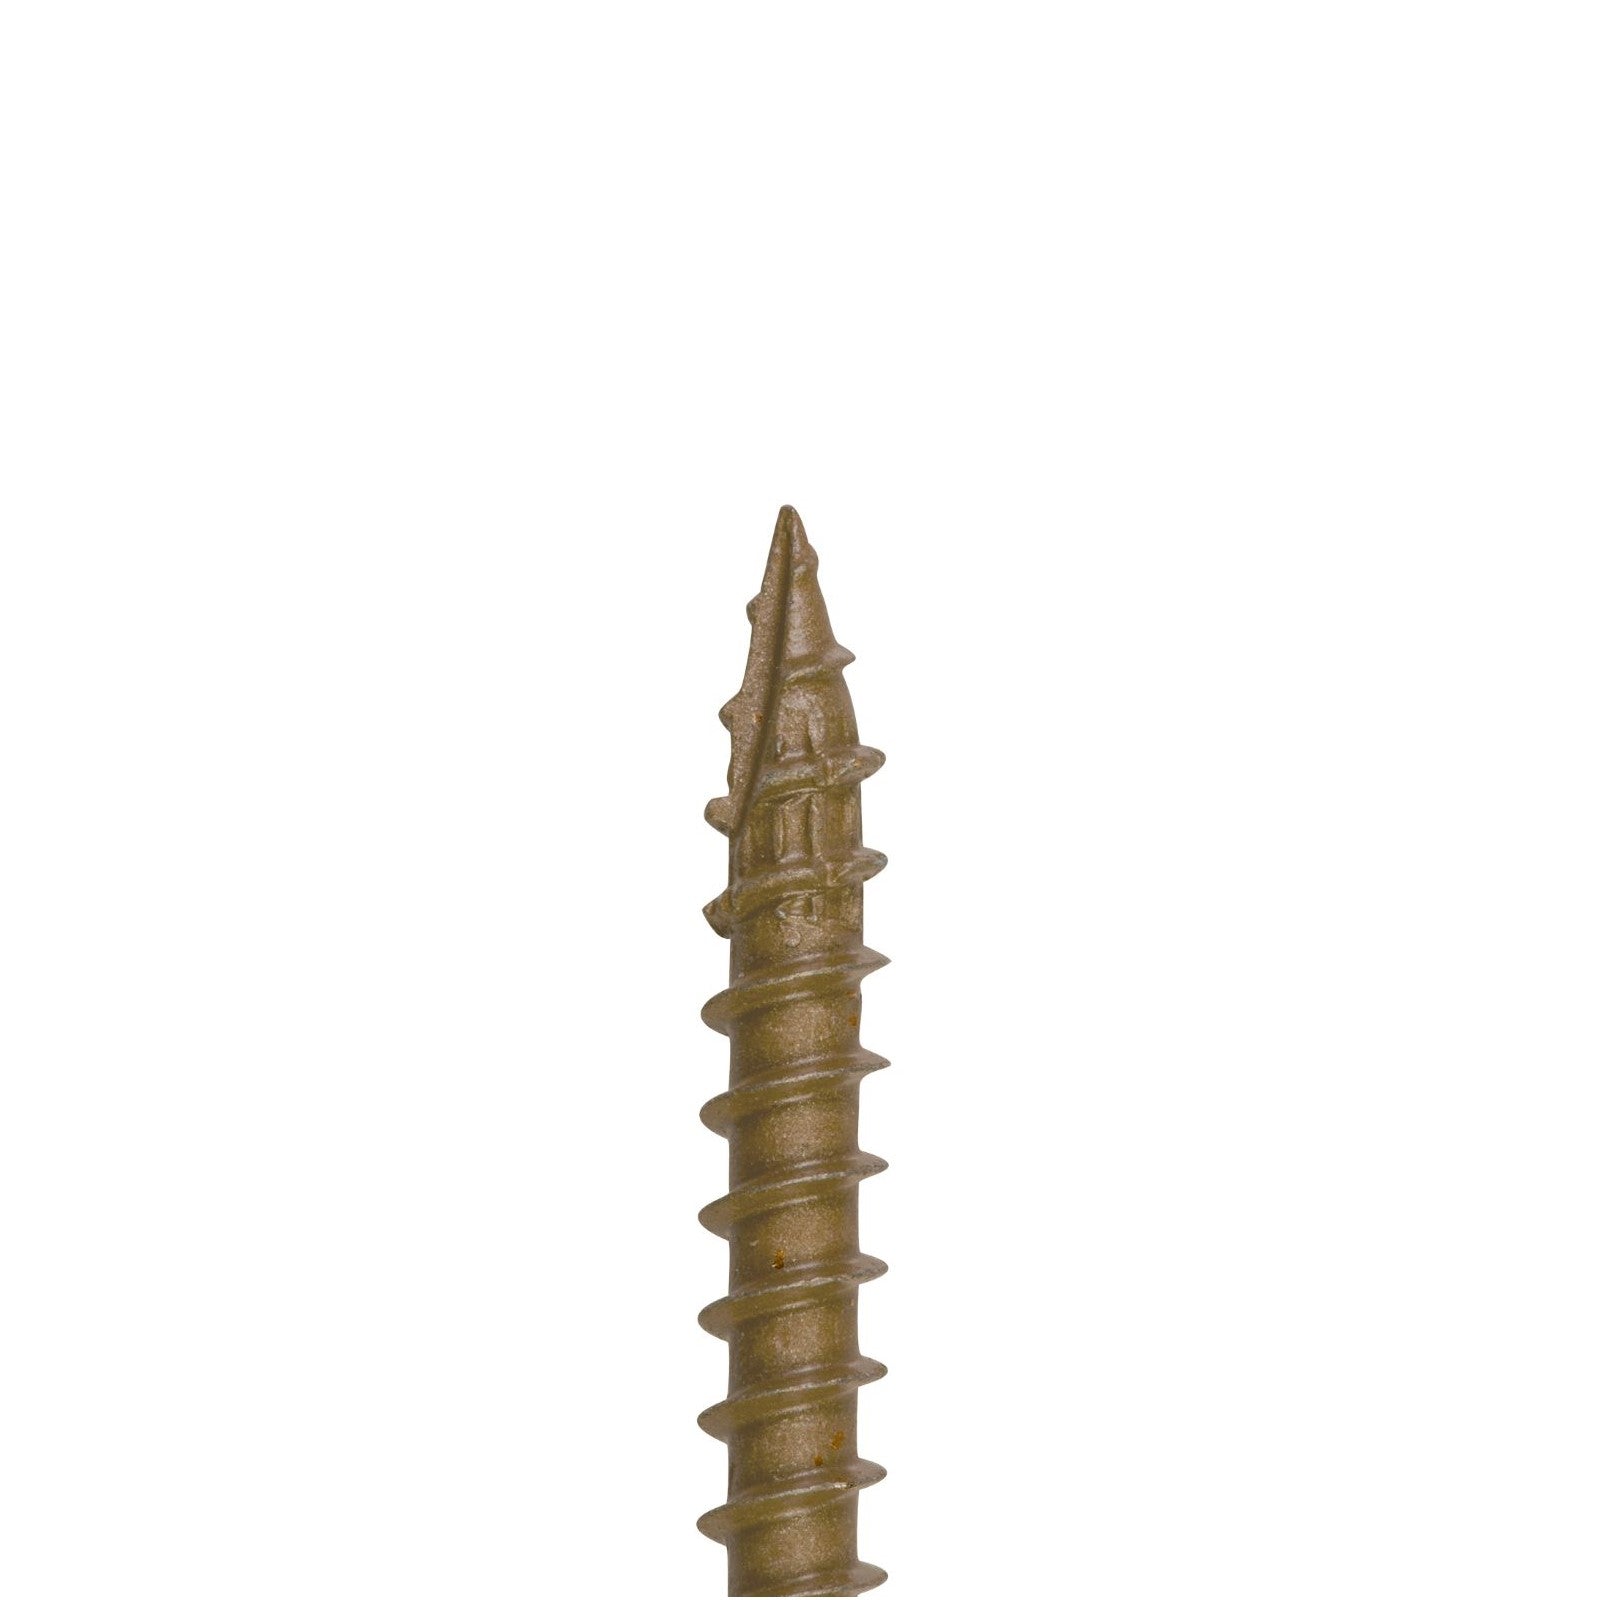 160 inch x 212 inch StrongTie SDWS Framing Screws Pkg 1000 image 1 of 3 image 2 of 3 image 3 of 3